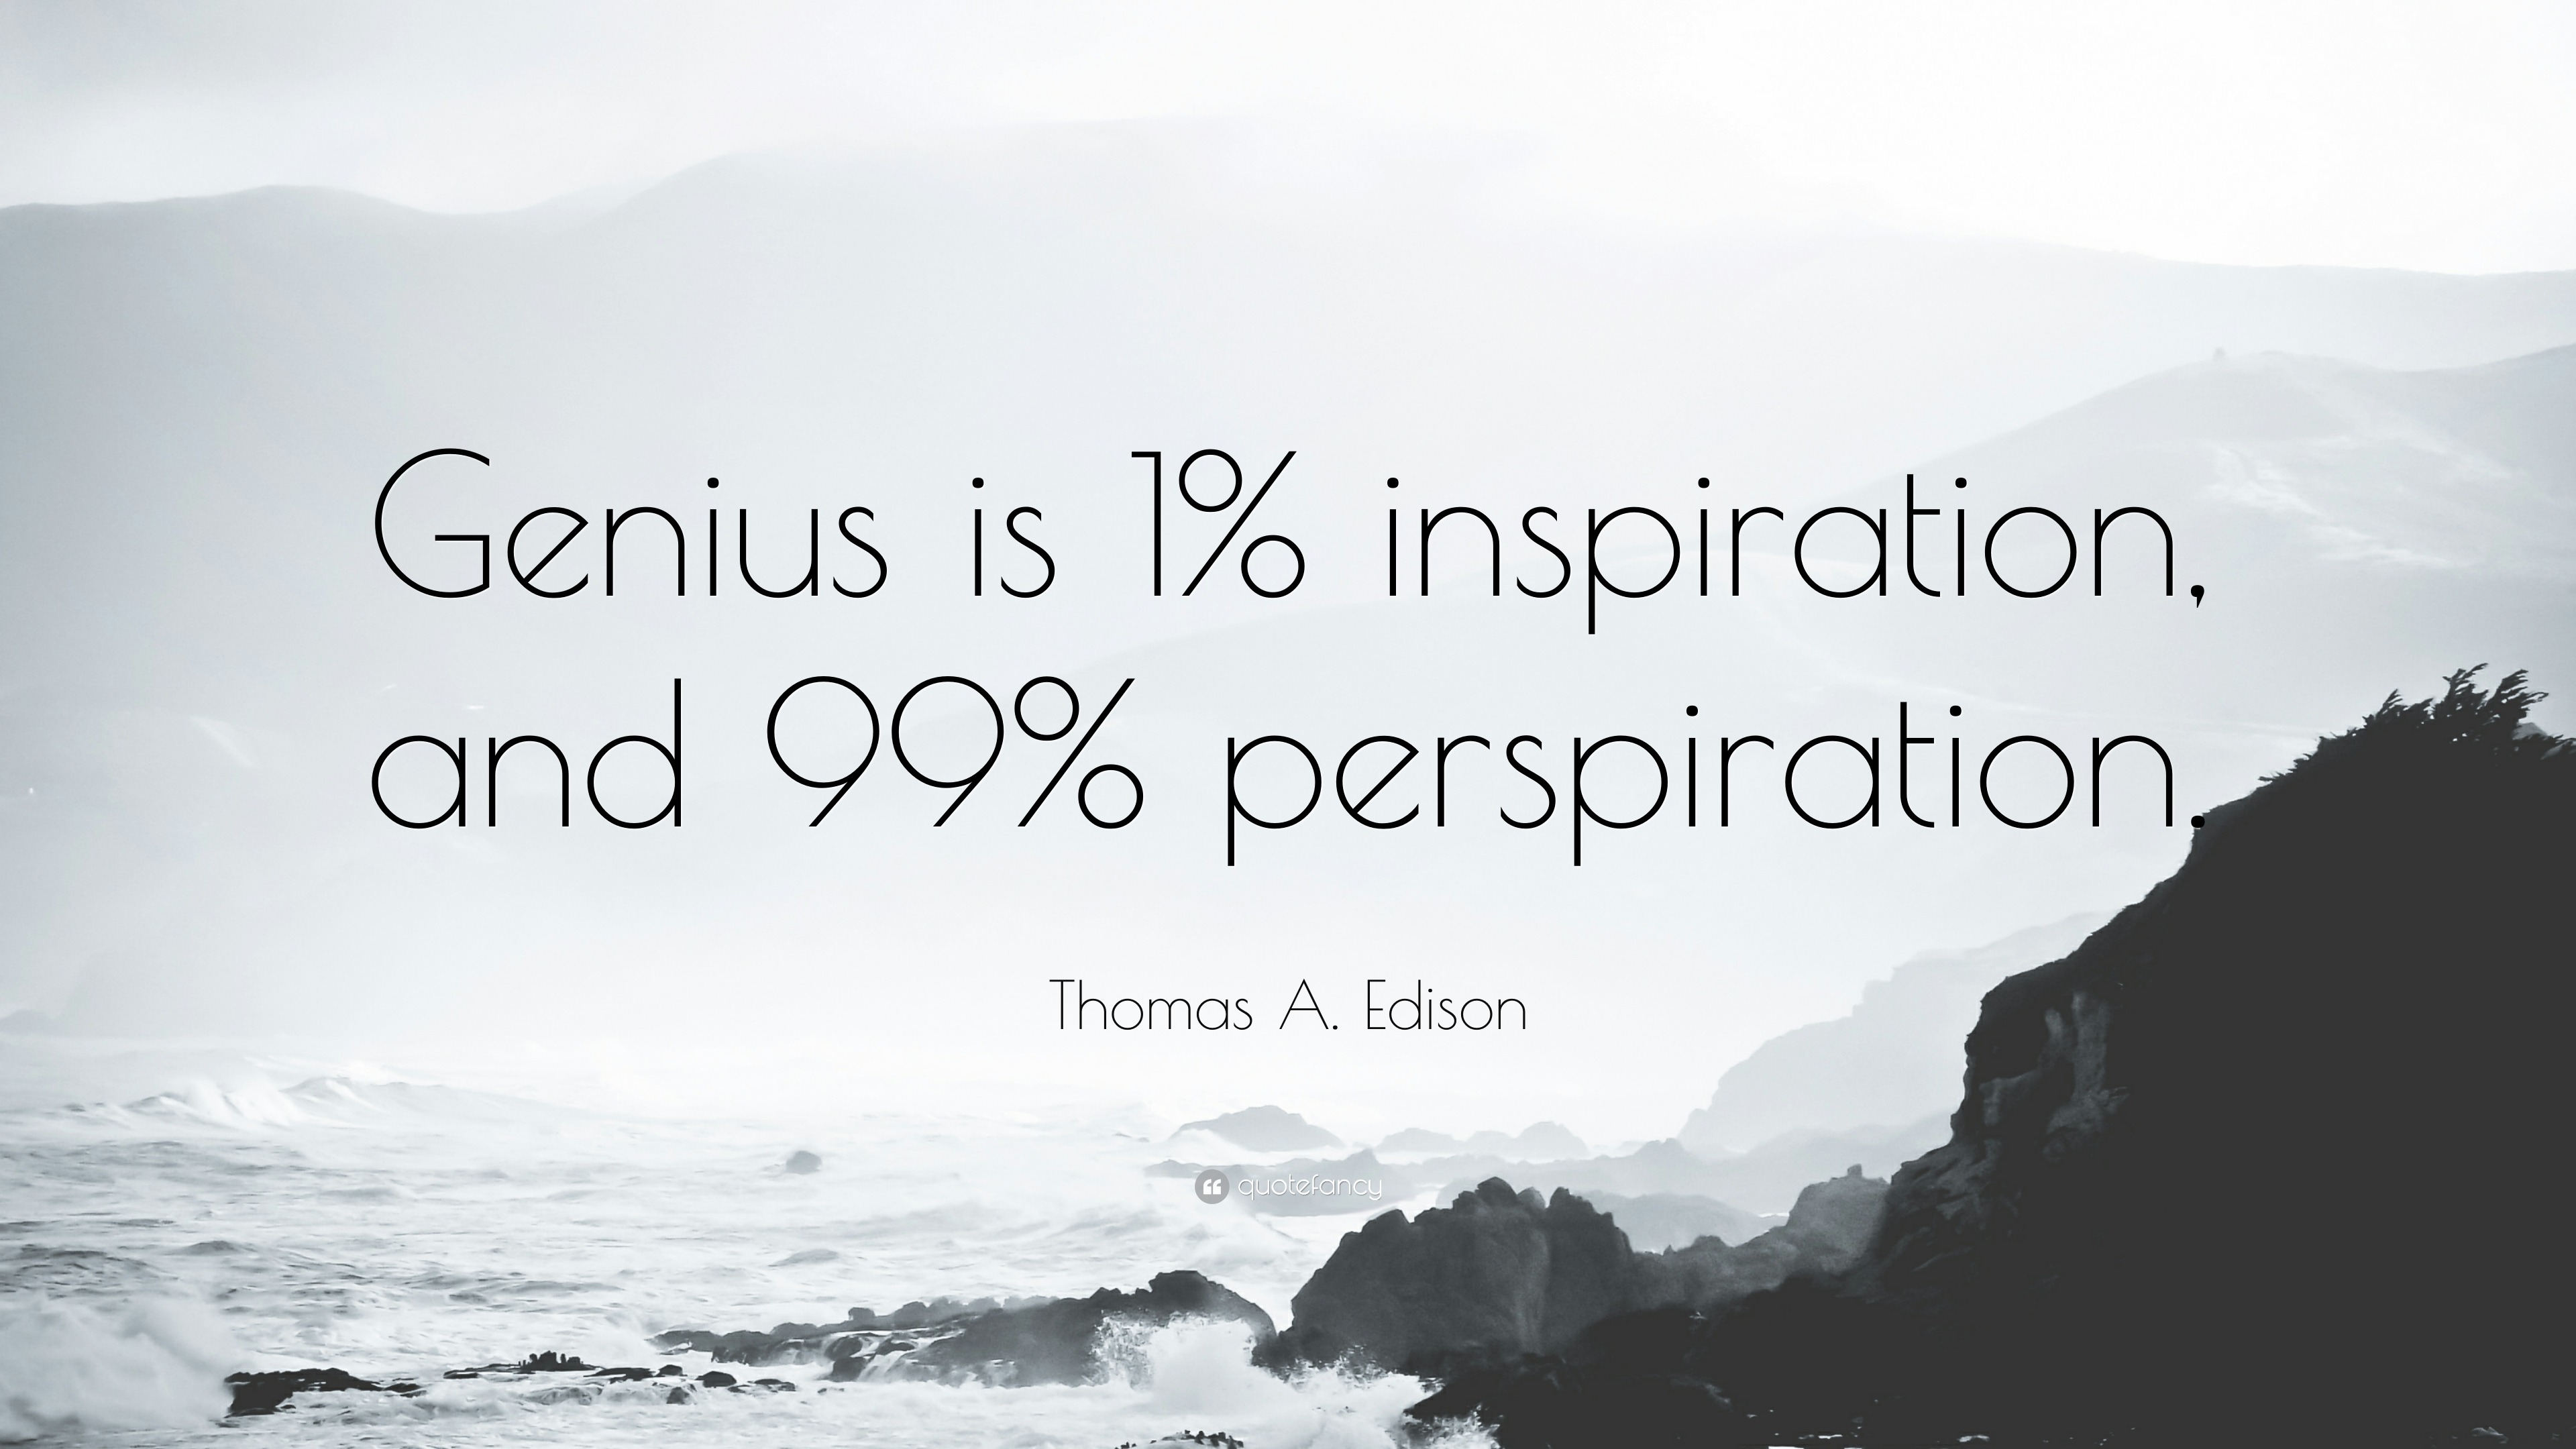 Image result for ”Genius is 1% inspiration, and 99% perspiration.” - Thomas Edison"